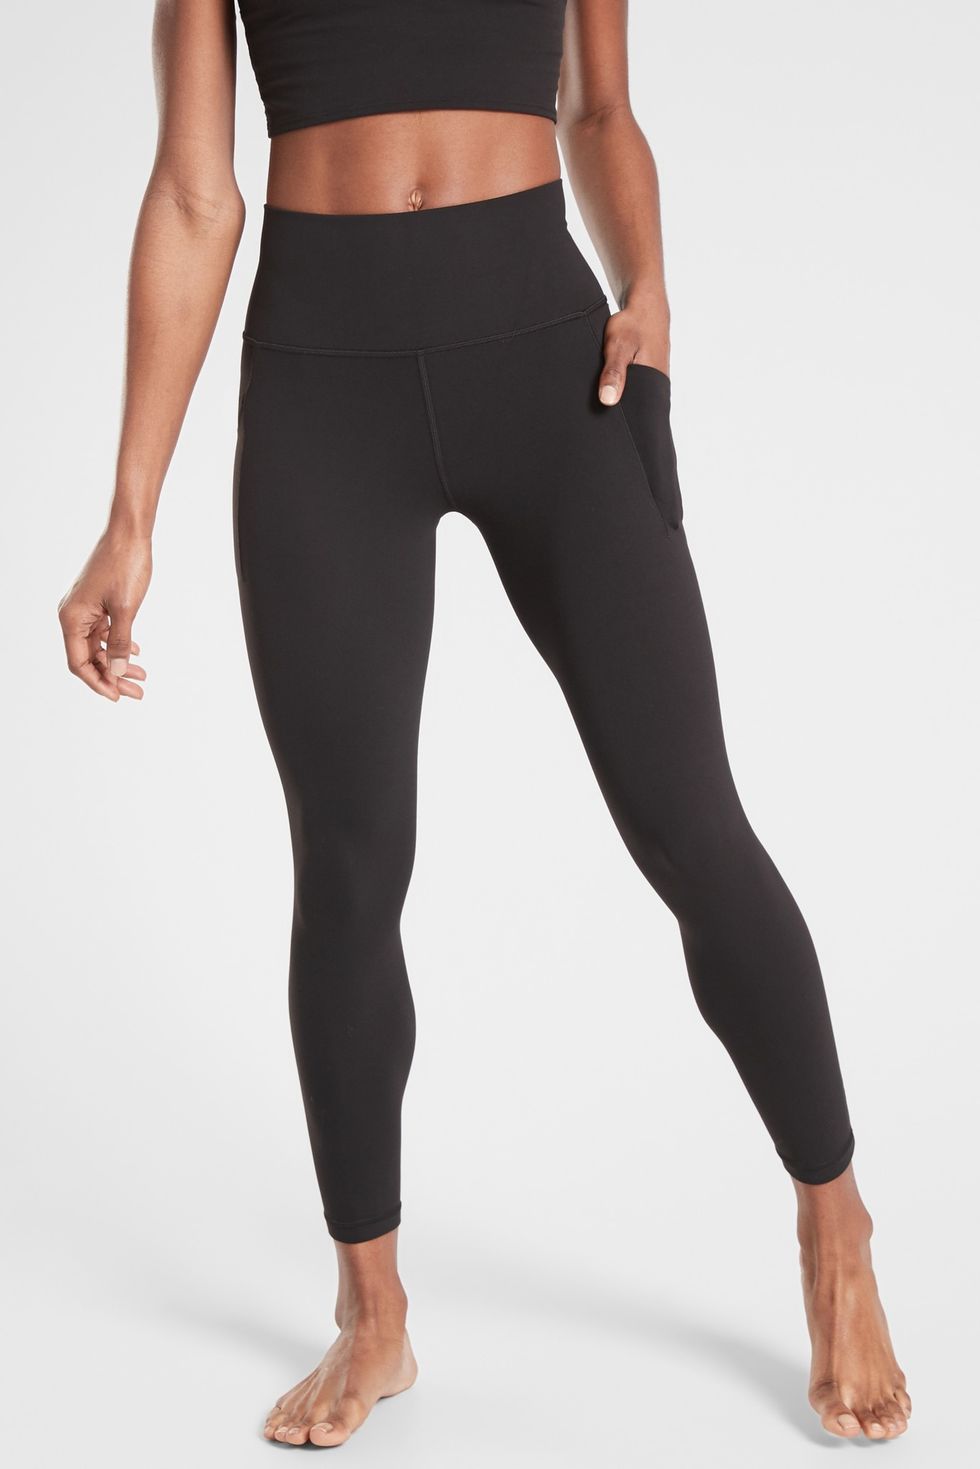 Pact Workout Clothes: Women's Activewear & Athletic Wear - Macy's